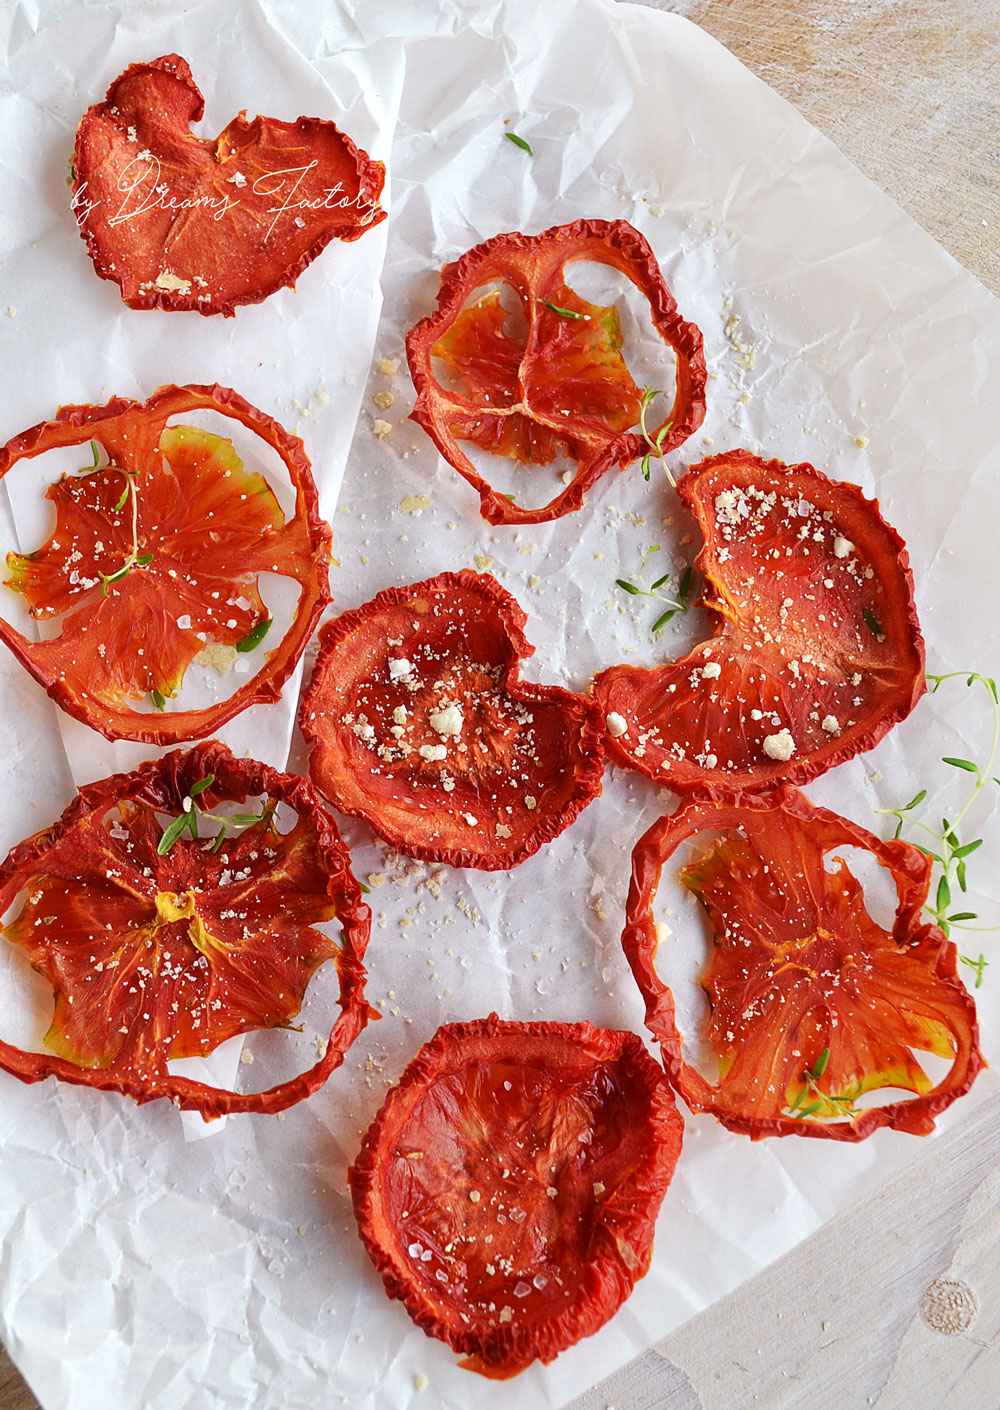 These sun-dried tomatoes chips with sea salt, cashew and herbs are easy to make and almost too good to be true when it comes to their rich delicious flavor! www.bydreamsfactory.com